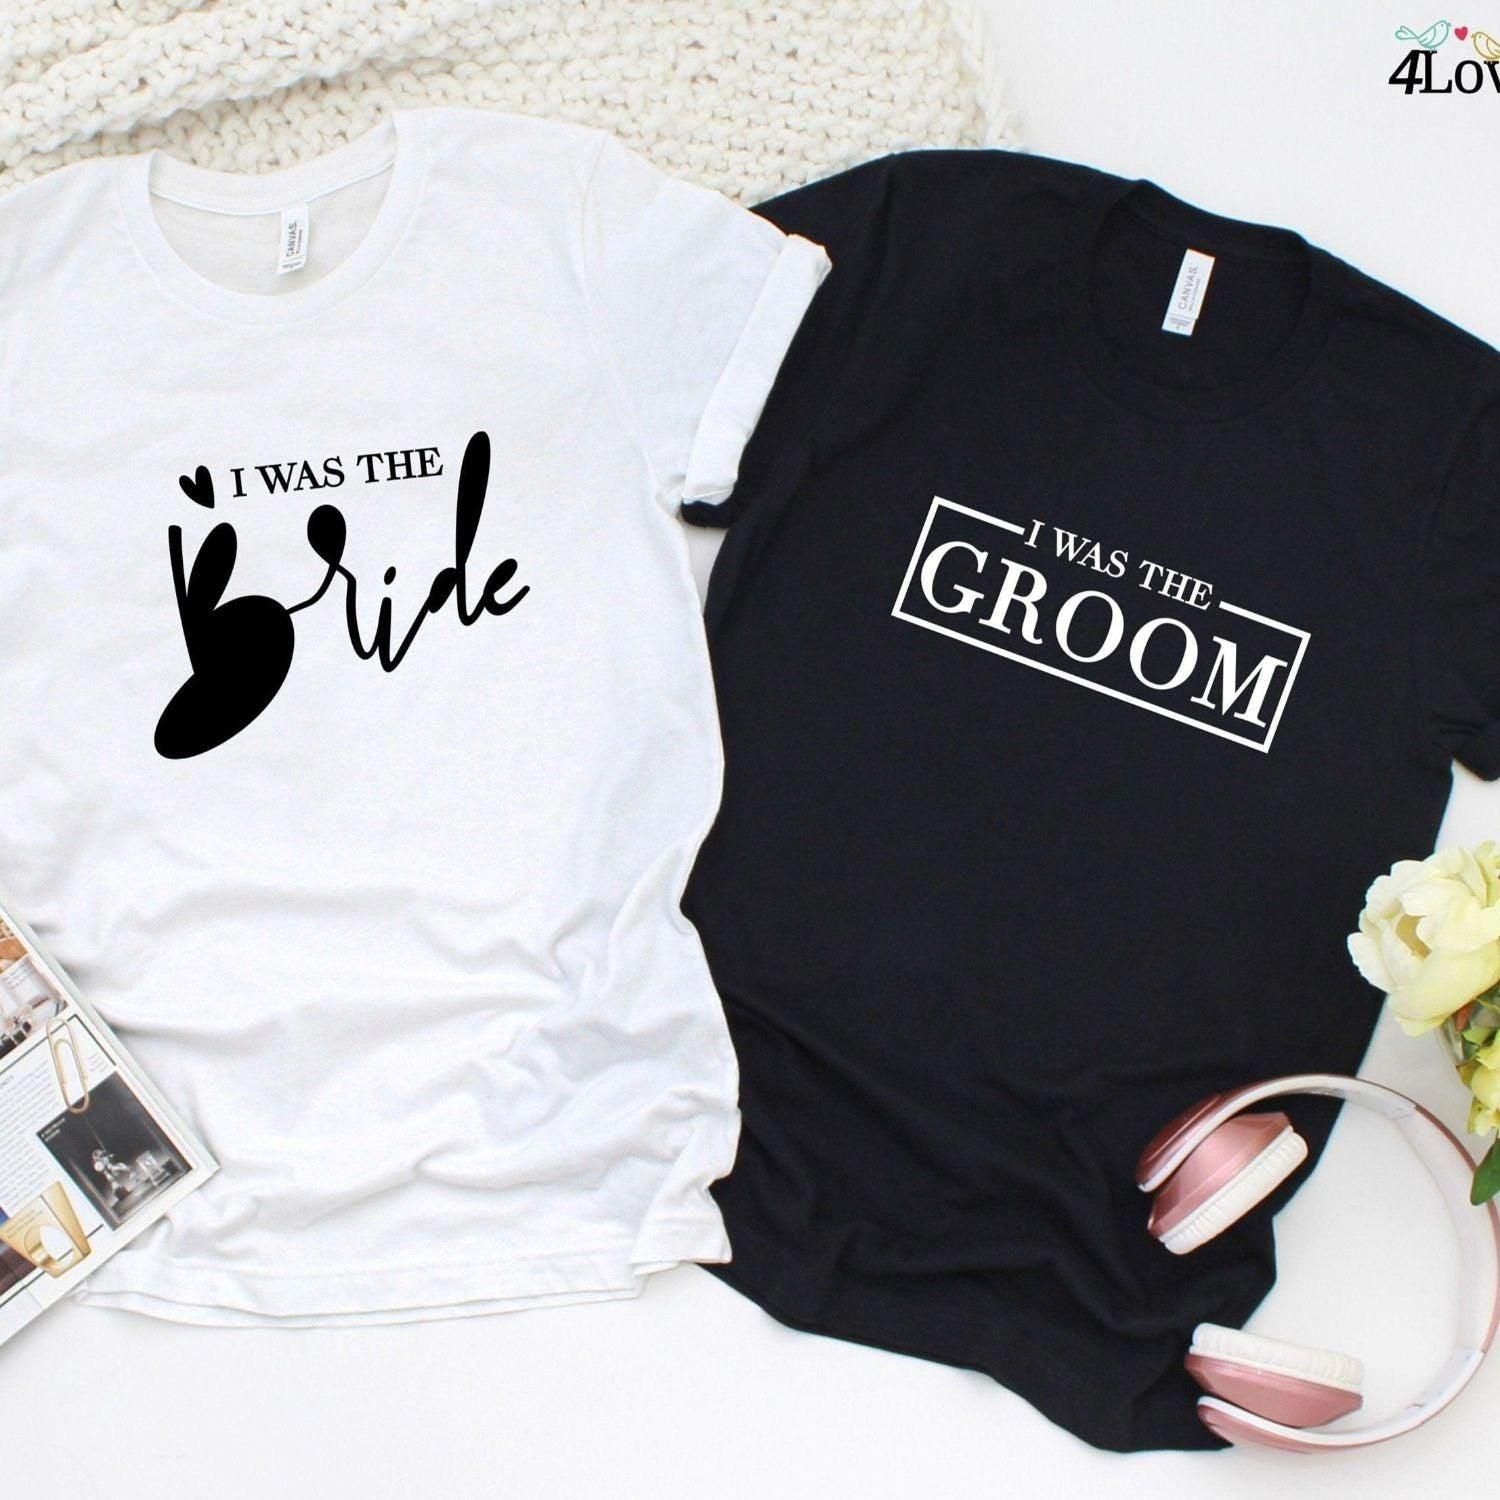 I Was the Groom & I Was the Bride - Perfect Pair Matching Outfits For Newlyweds! - 4Lovebirds